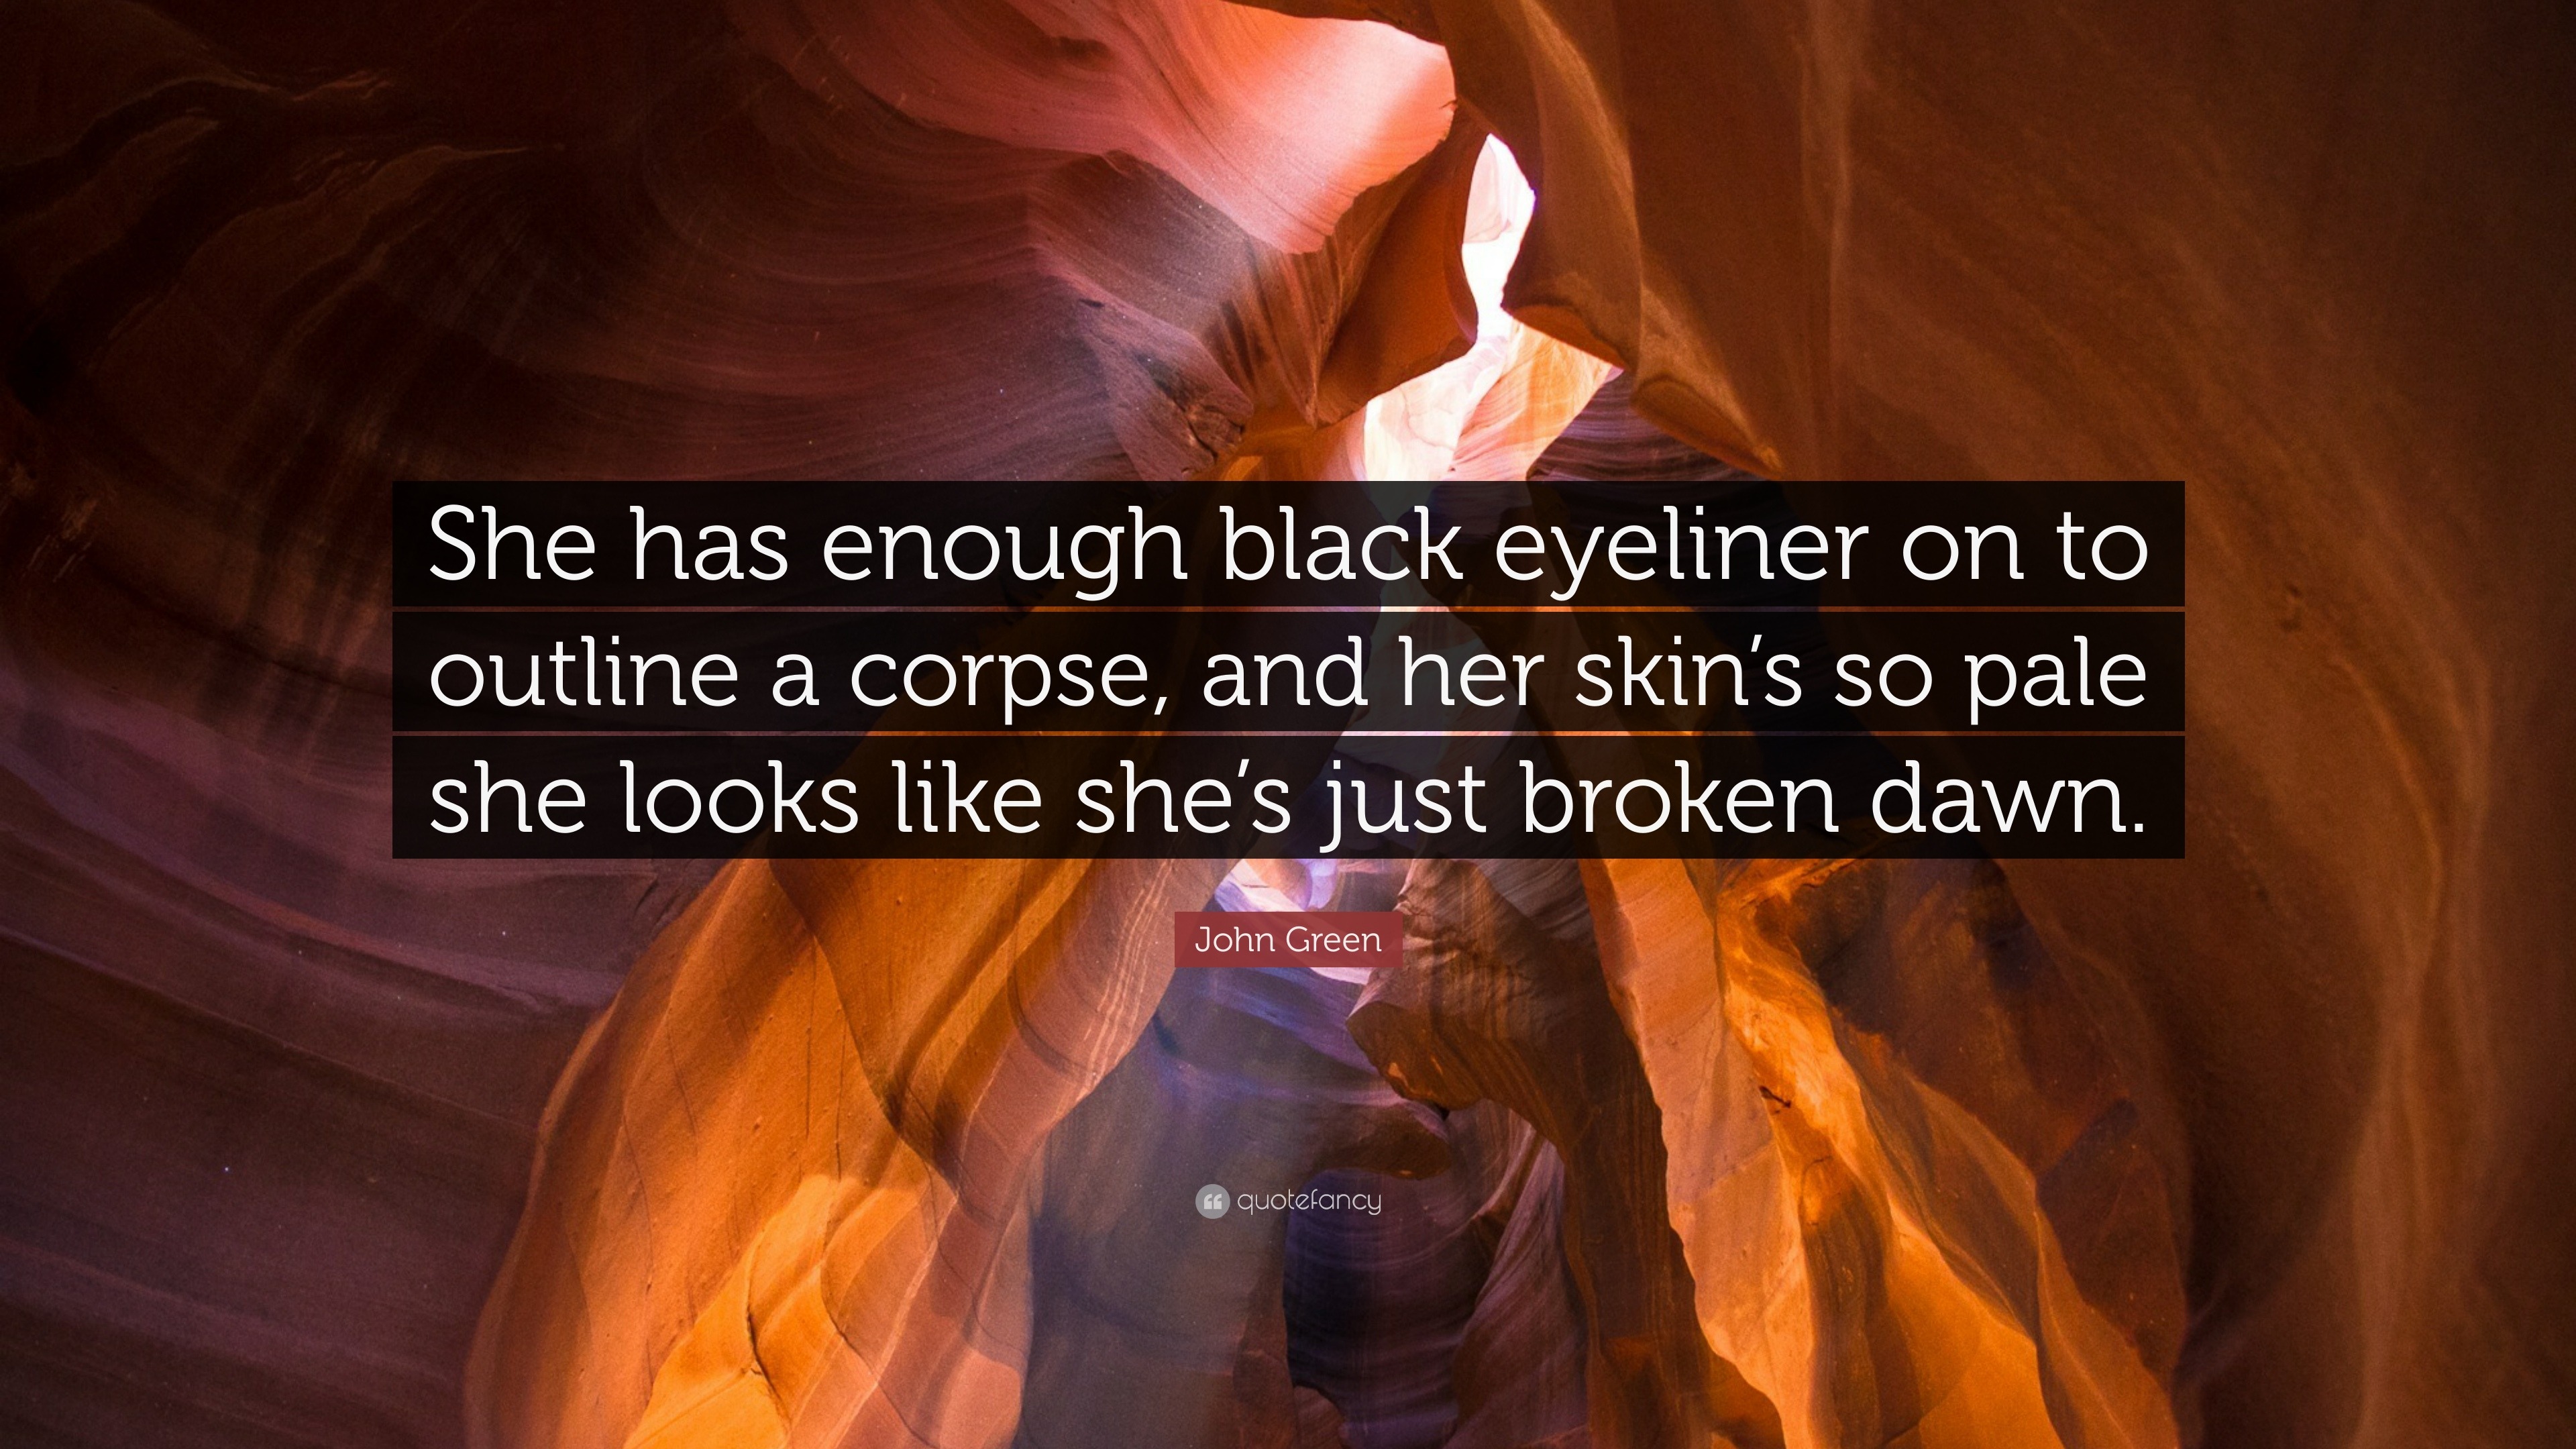 John Green Quote: “She has enough black eyeliner on to outline a corpse,  and her skin's